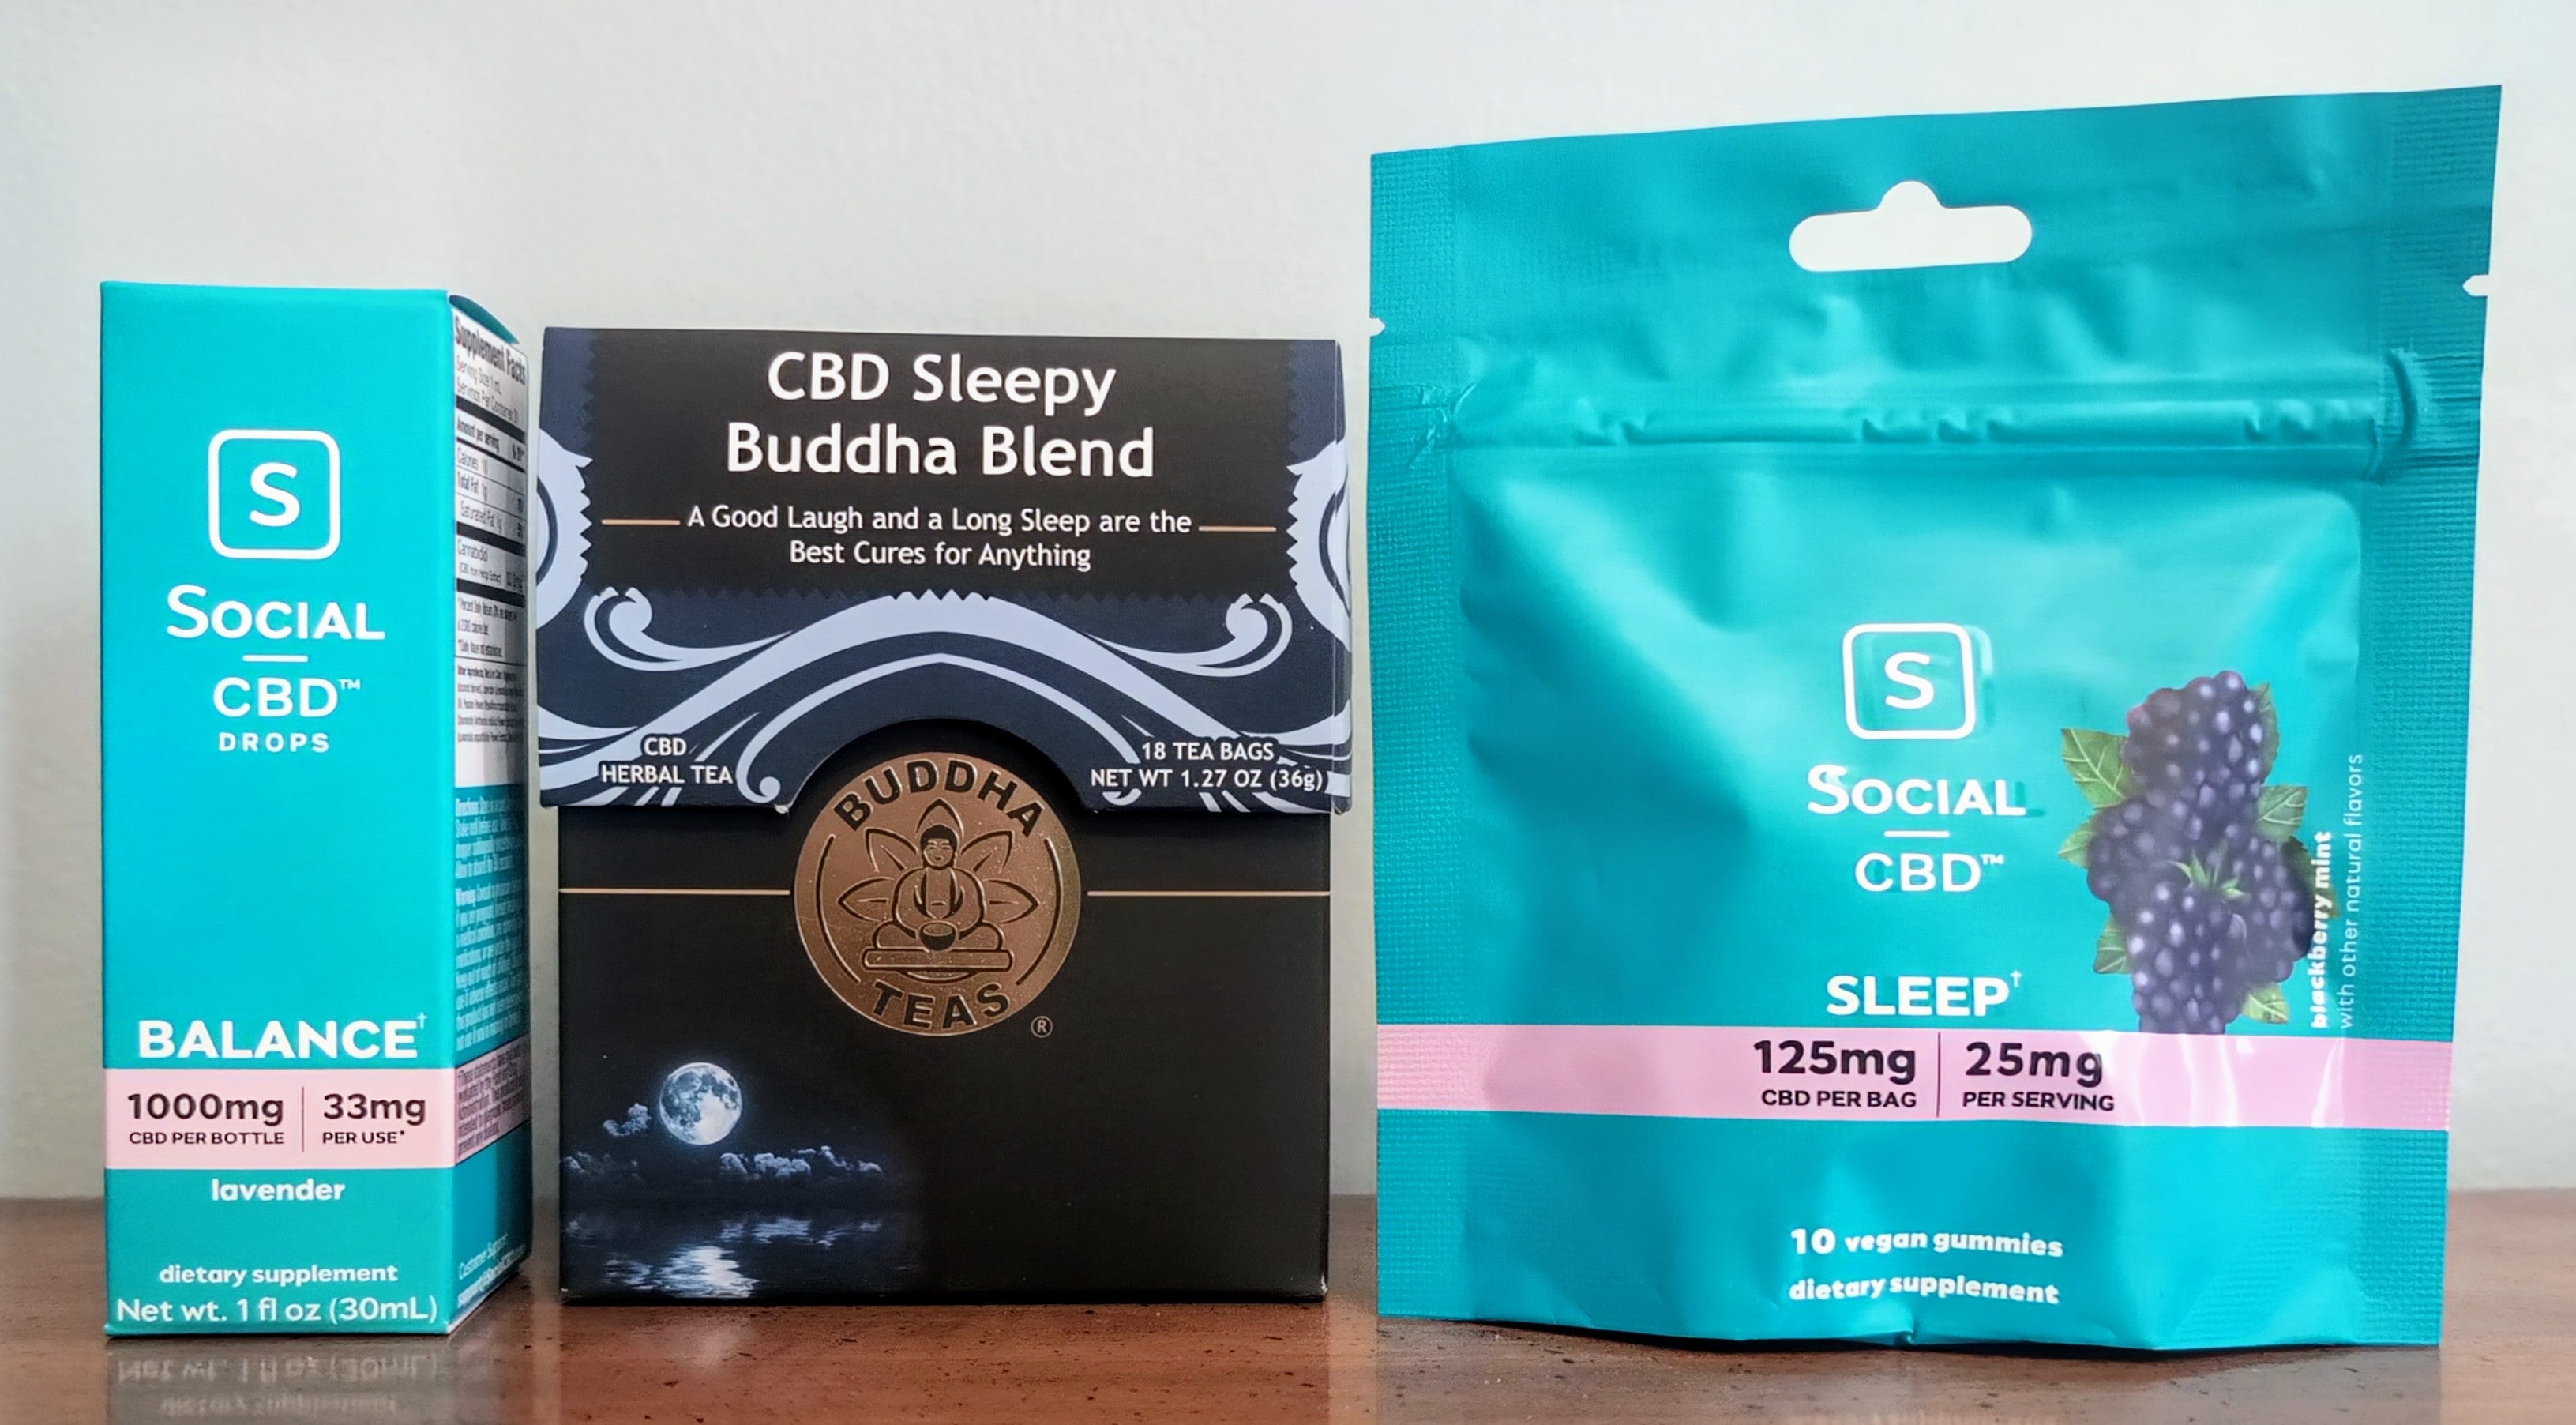 CBD Deal of the Month - Greater than 20% Discount! - Get 'em before their gone!